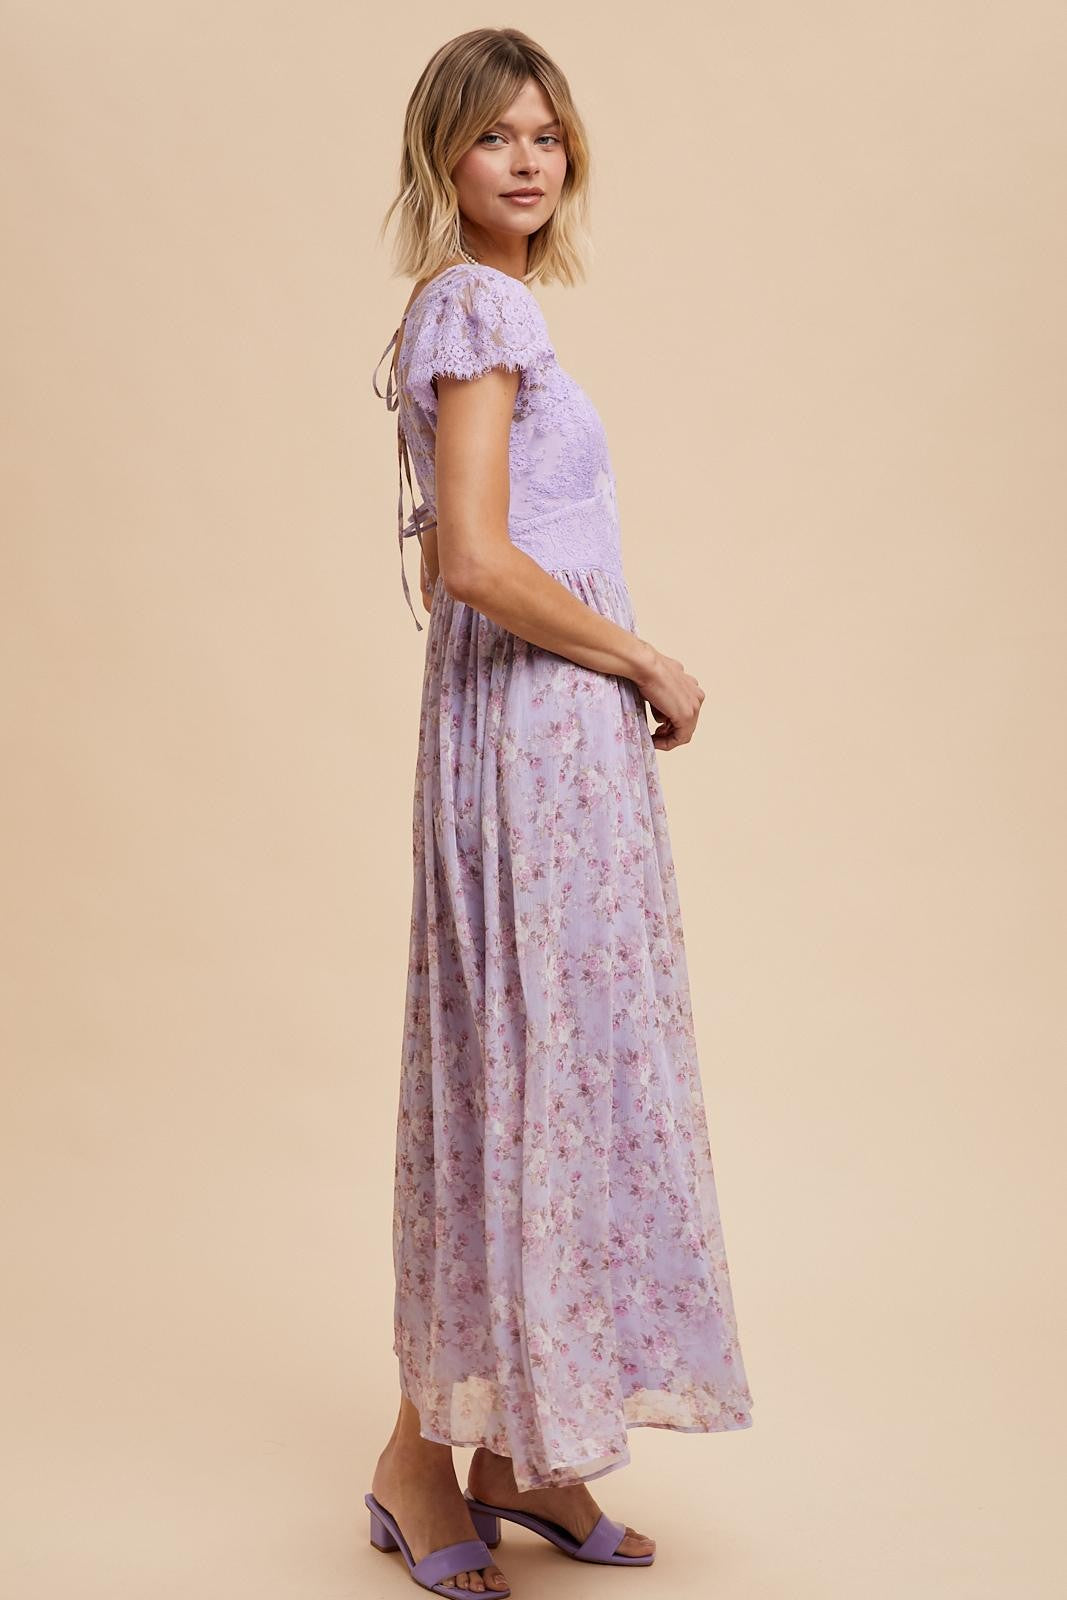 Dusty Lilac Maxi Dress - The Street Boutique 